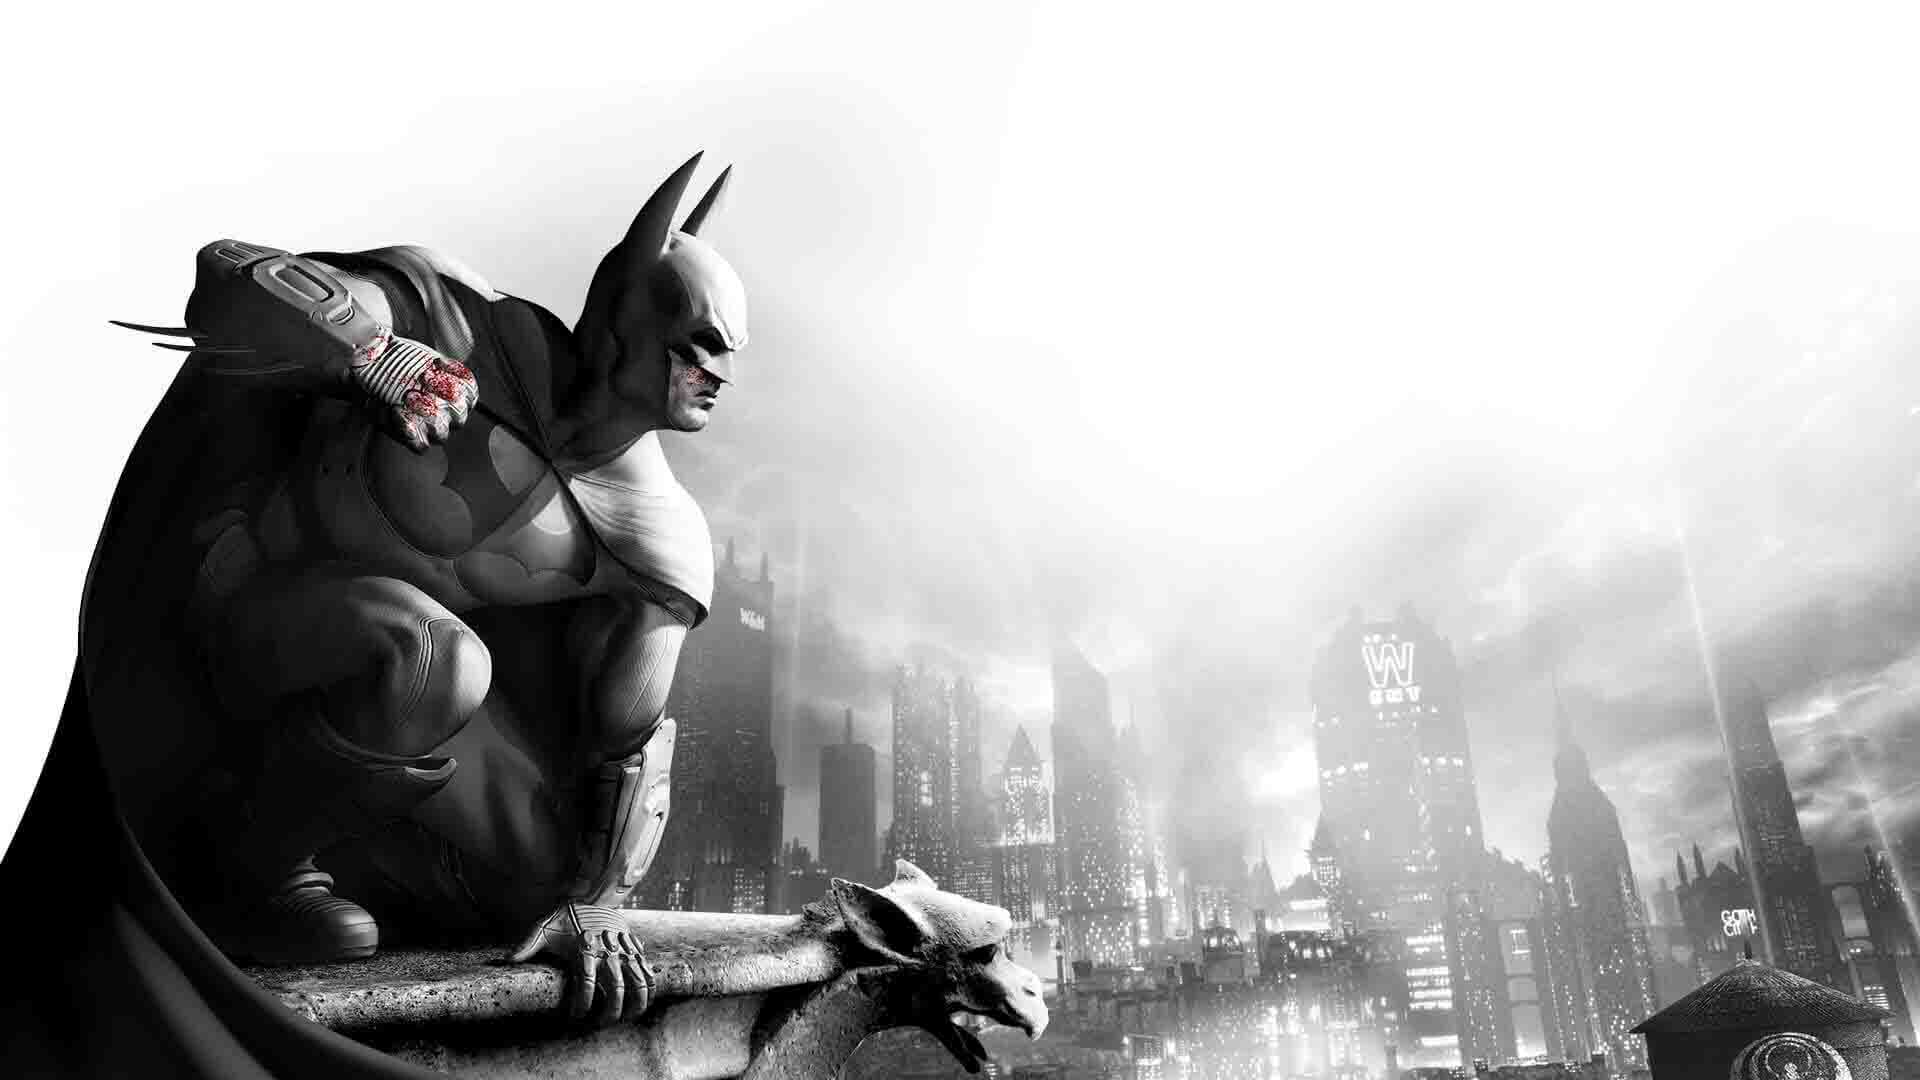 Batman™: Arkham City - Game of the Year Edition System Requirements for PC Games minimum, recommended specifications for Windows, CPU, OS, RAM, Storage, GPU.